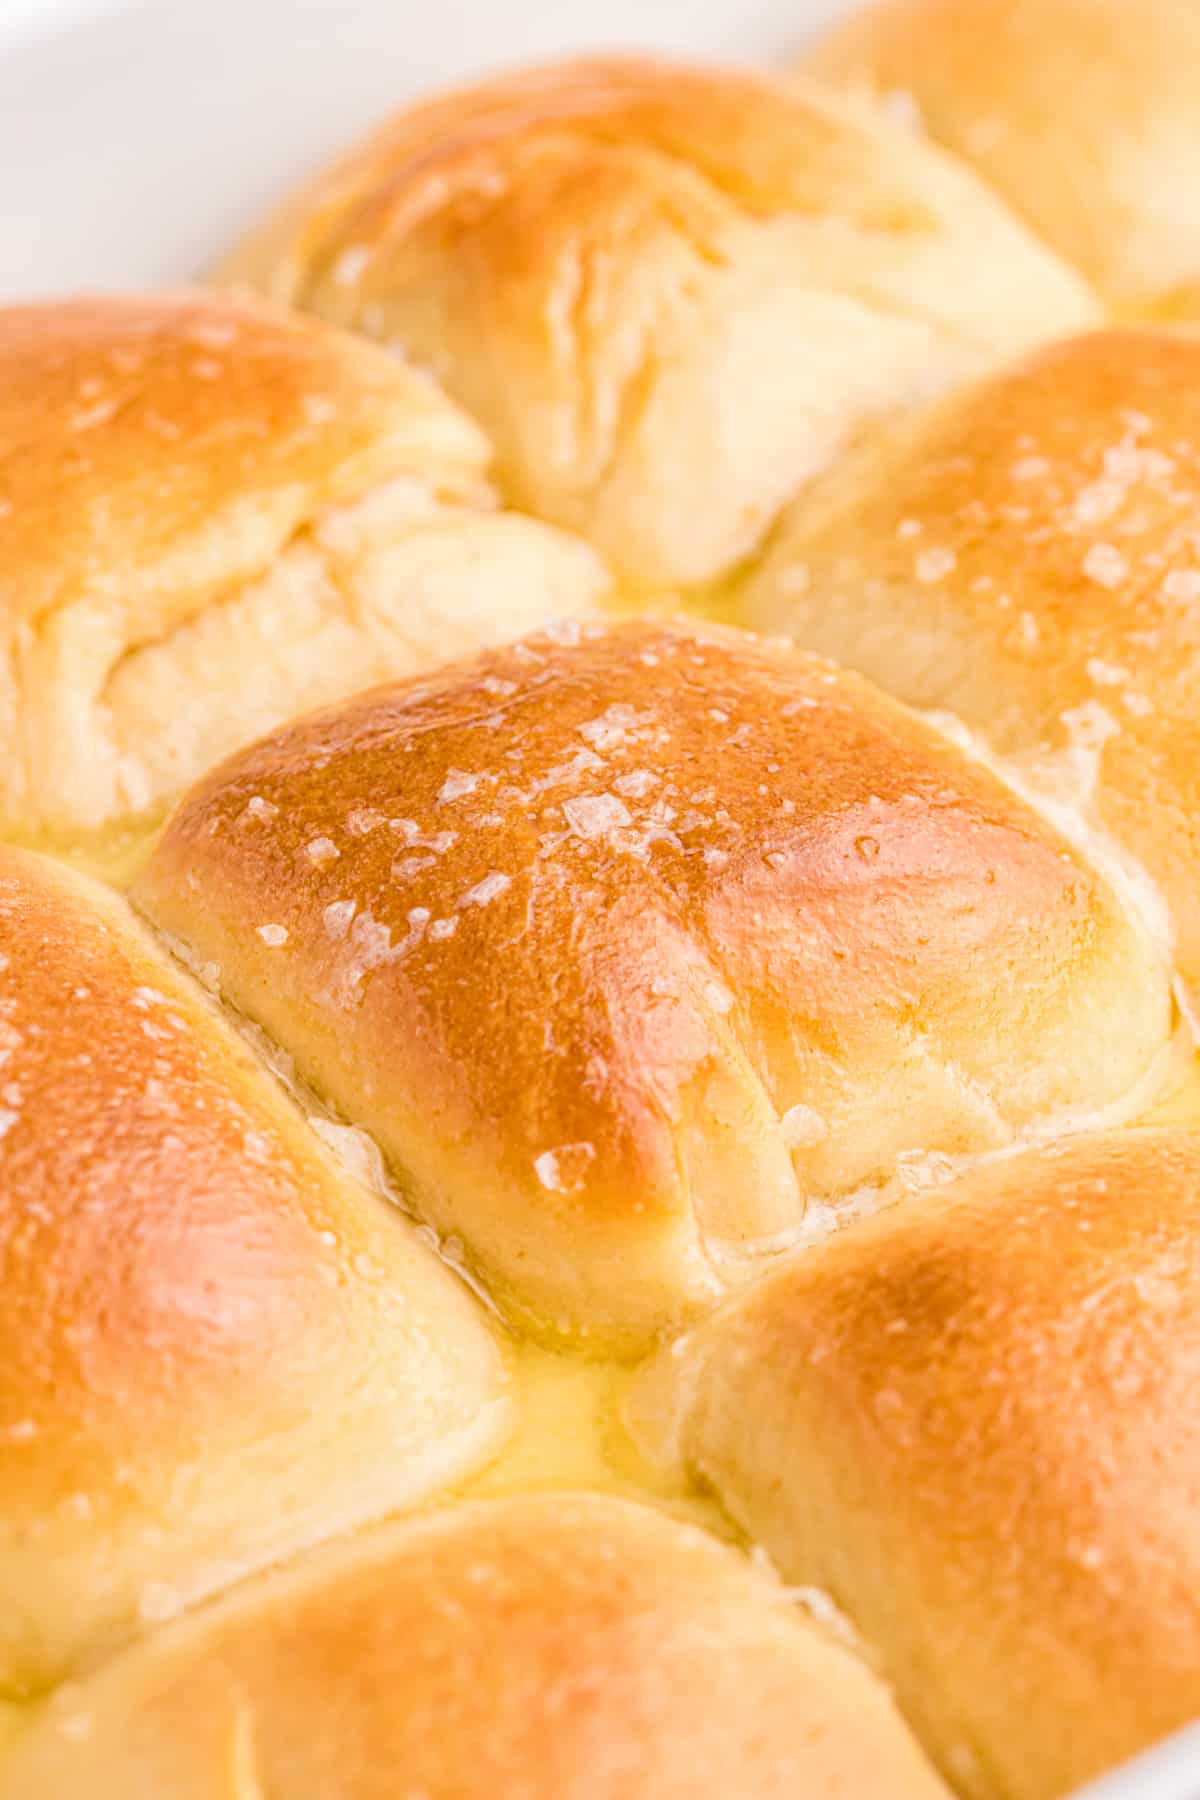 Buttered and salted rolls are baked to a golden brown color.